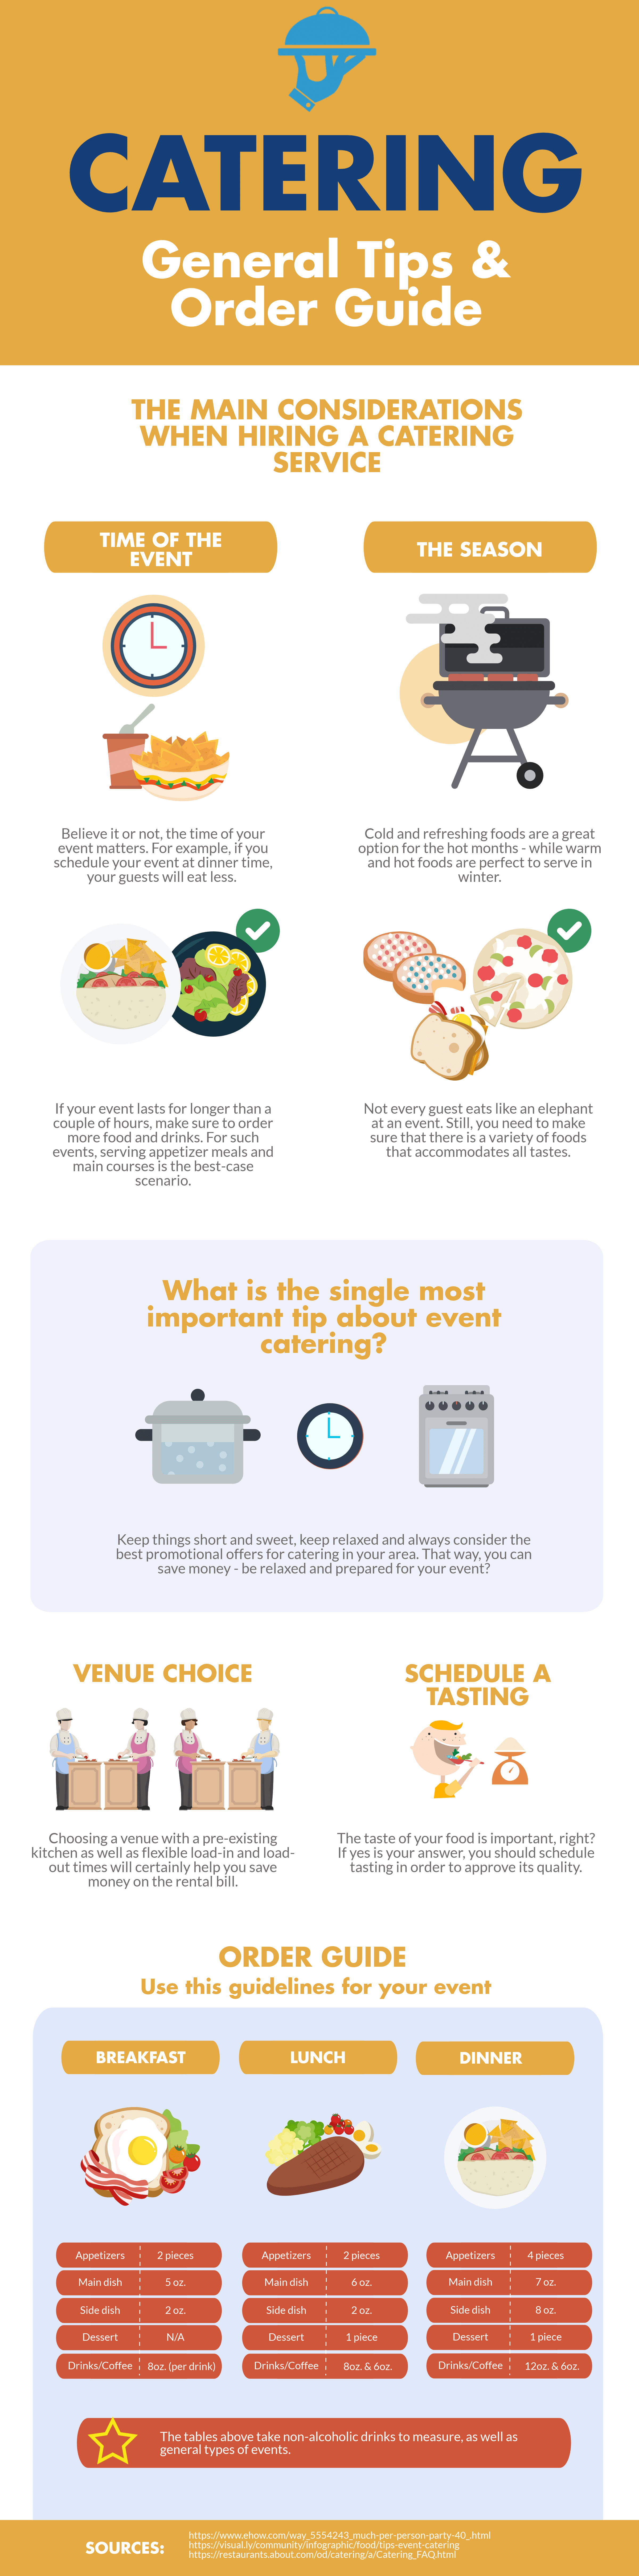 Catering General Tips and Ordering Guide Infographic